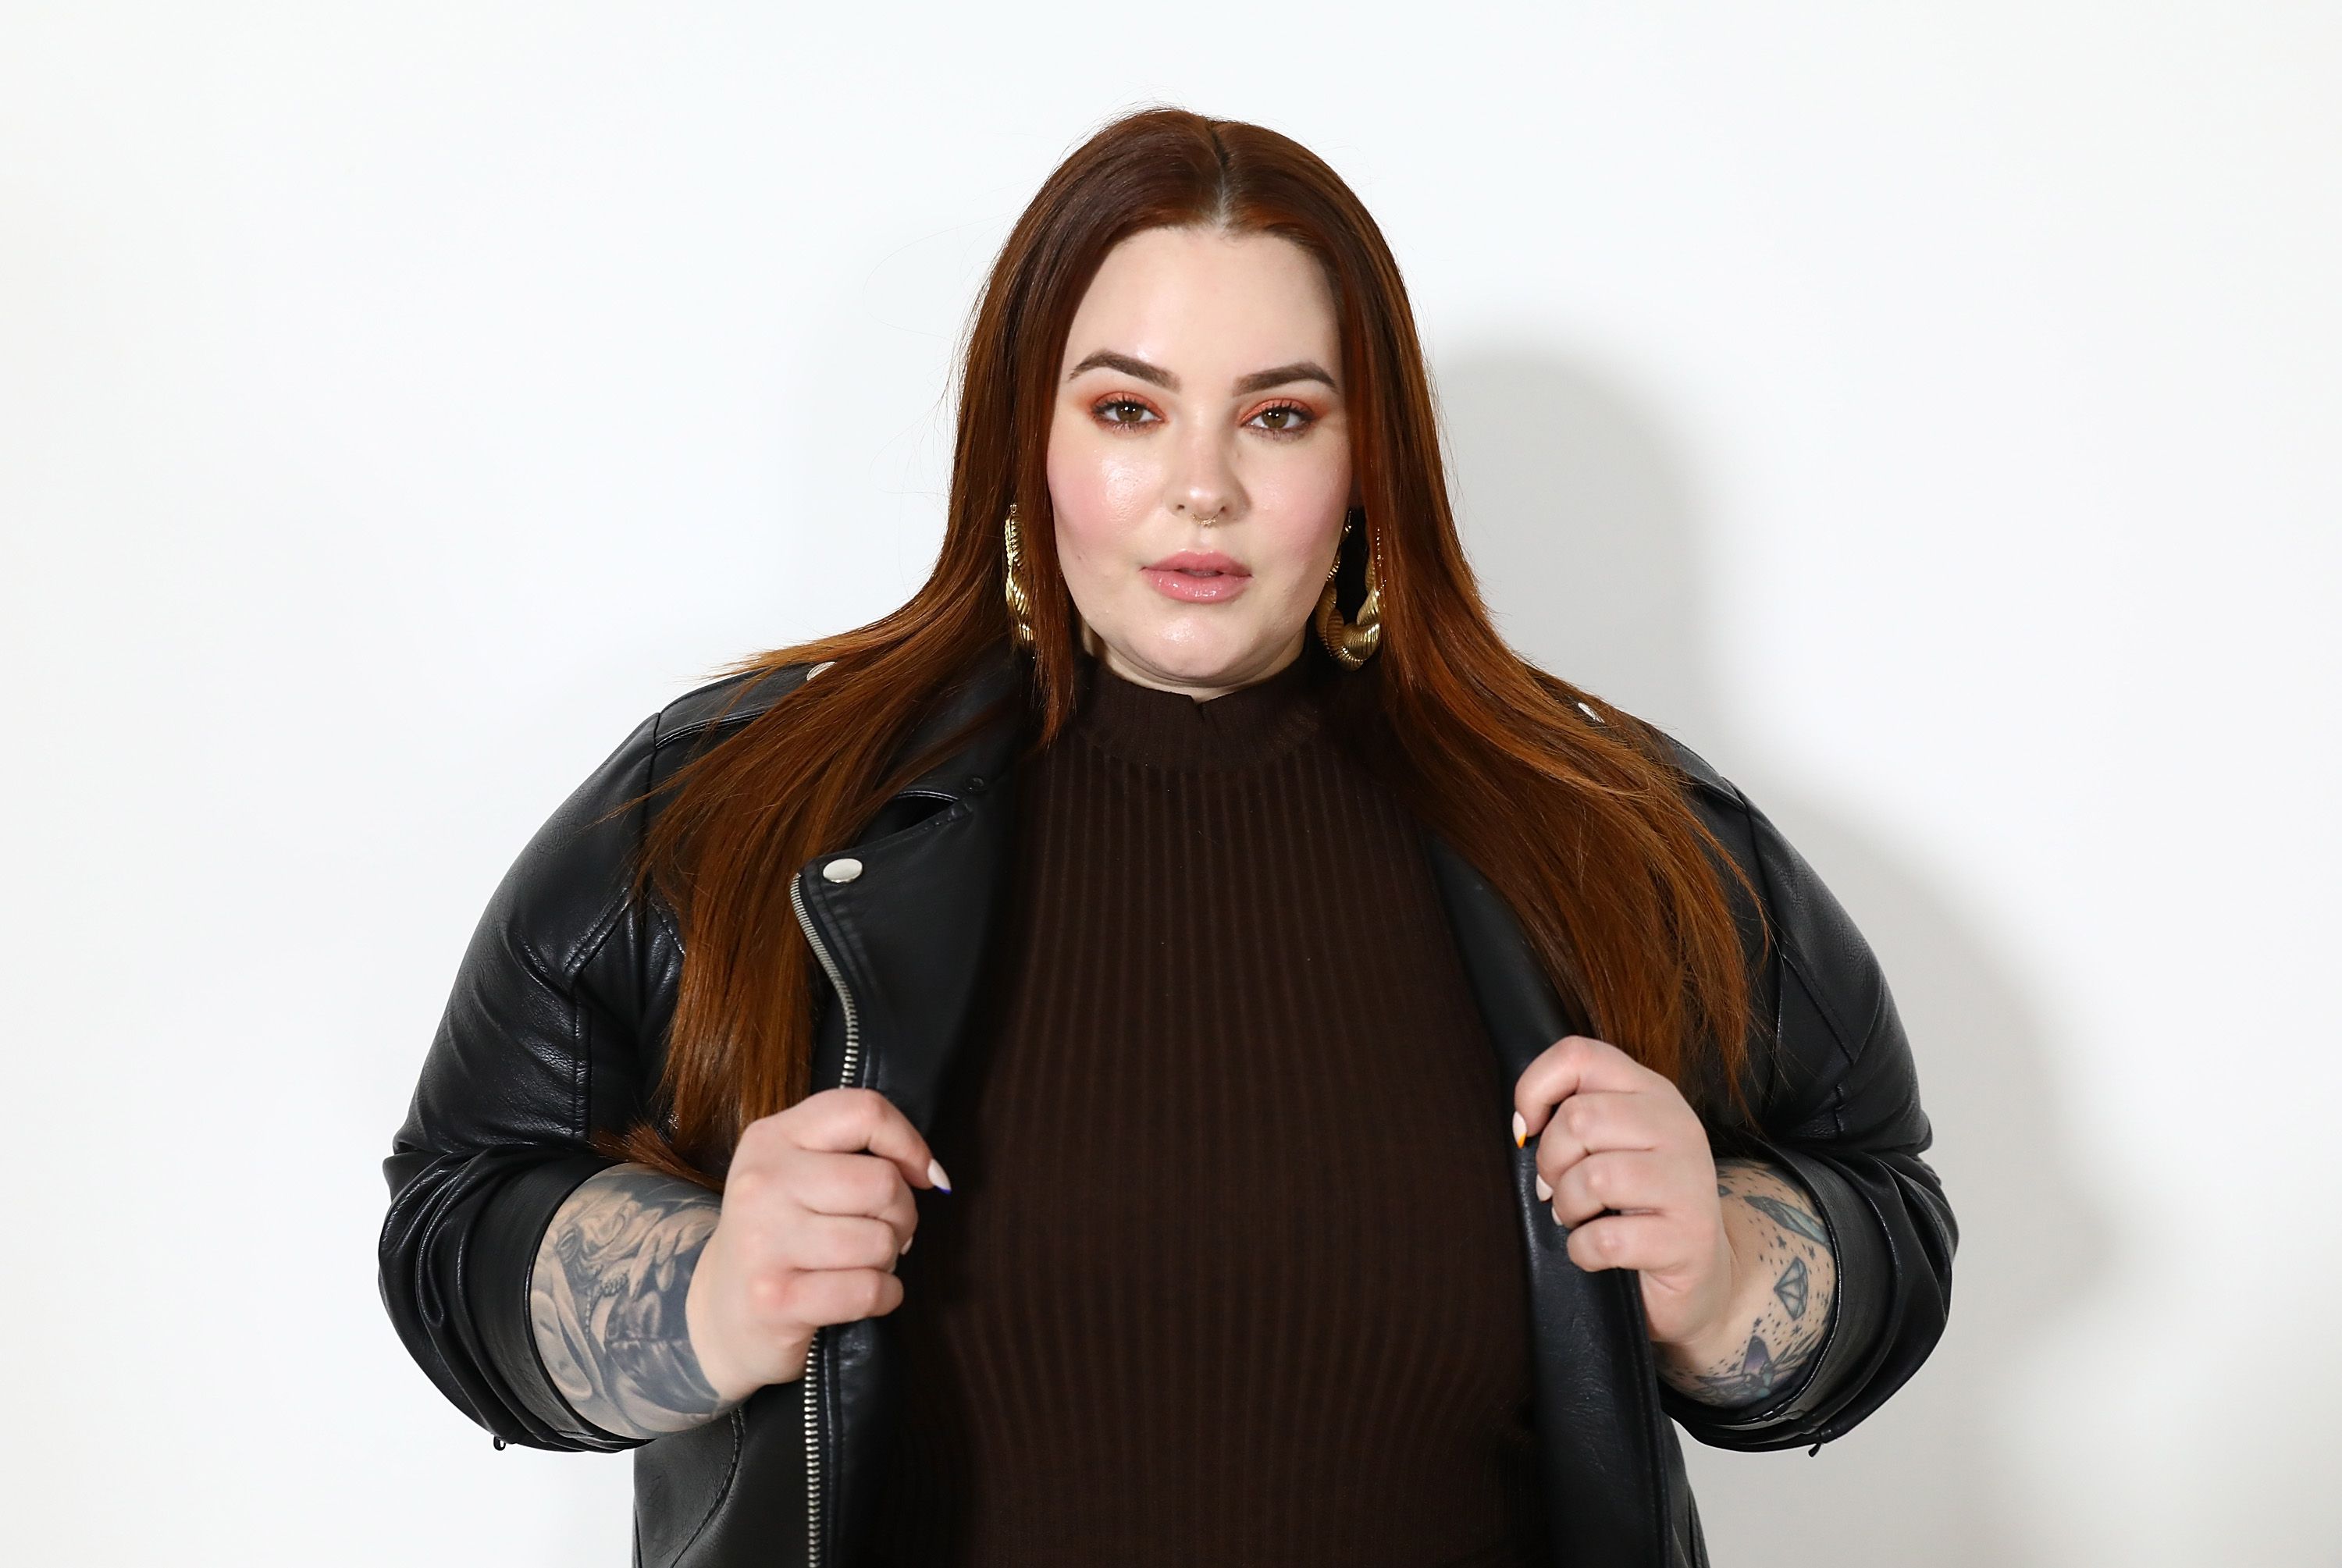 Plus-size model Tess Holliday leads body-positive movement - National